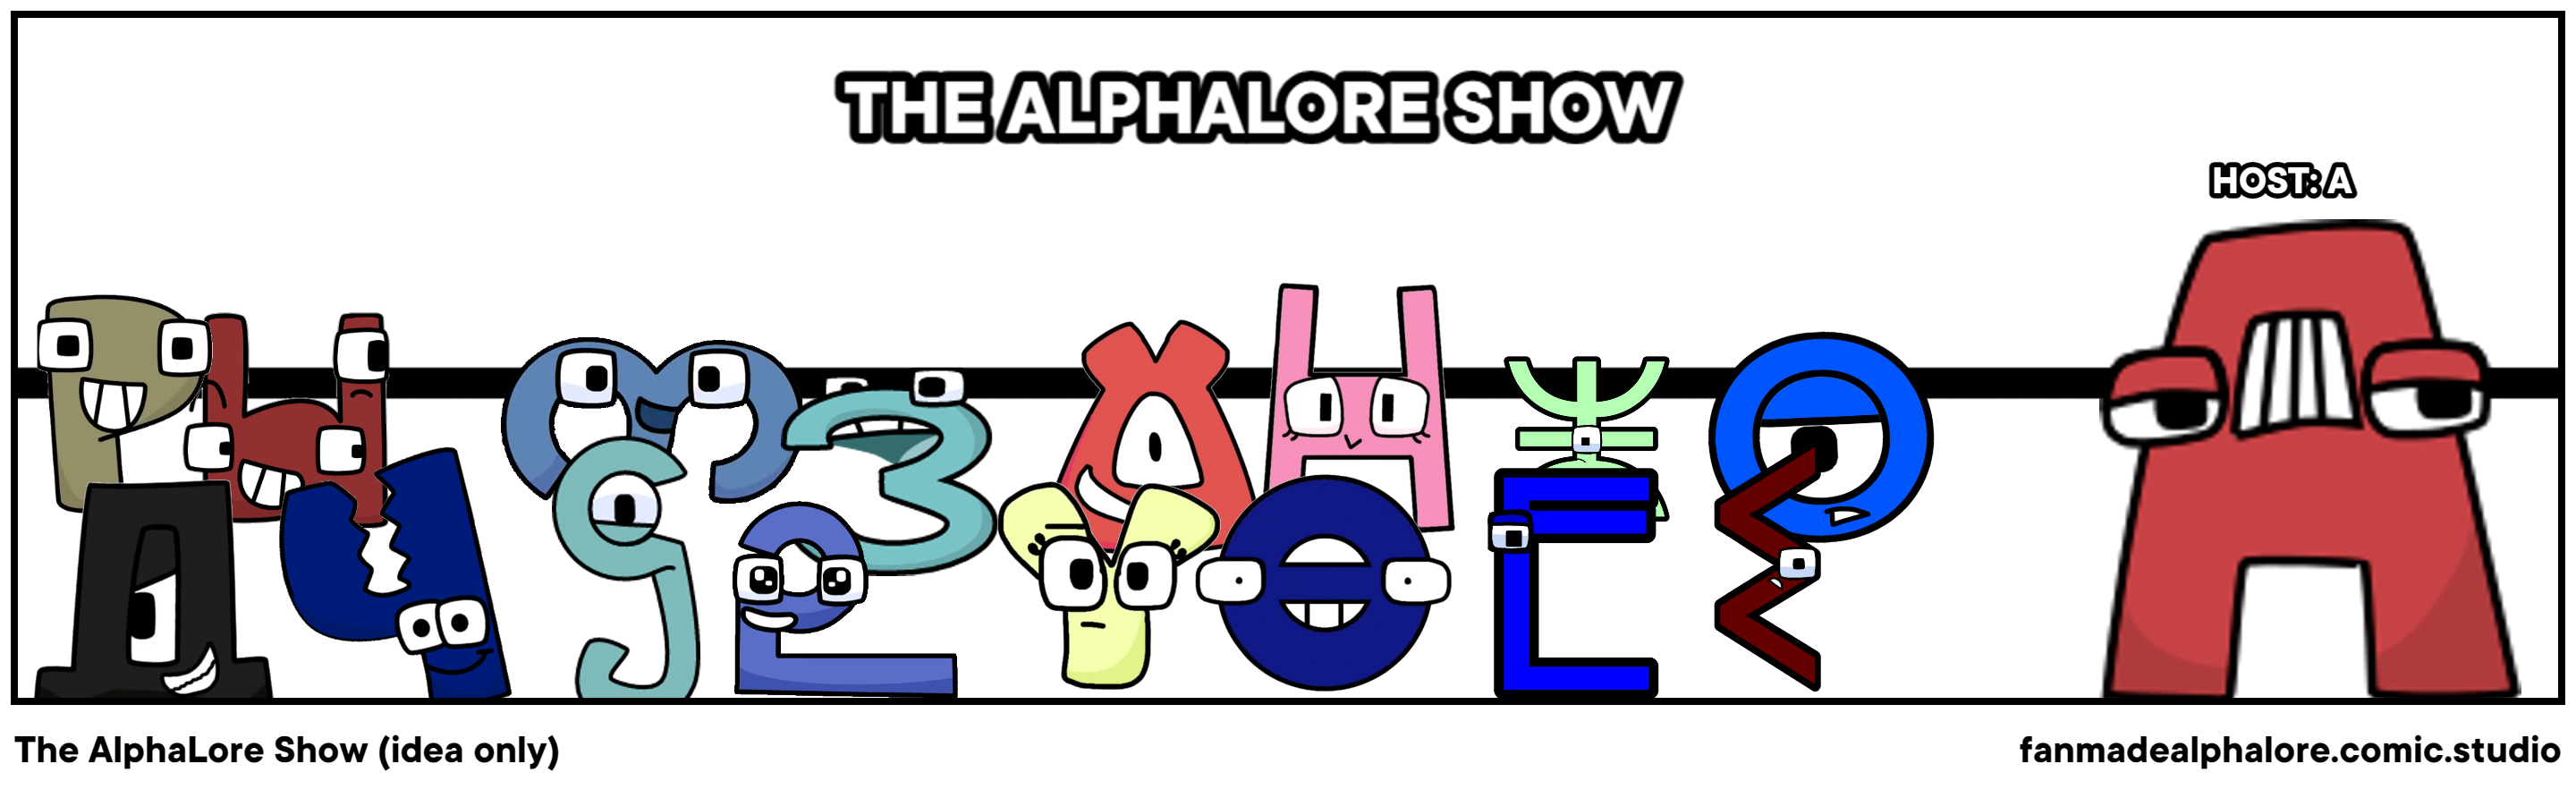 The AlphaLore Show (idea only)